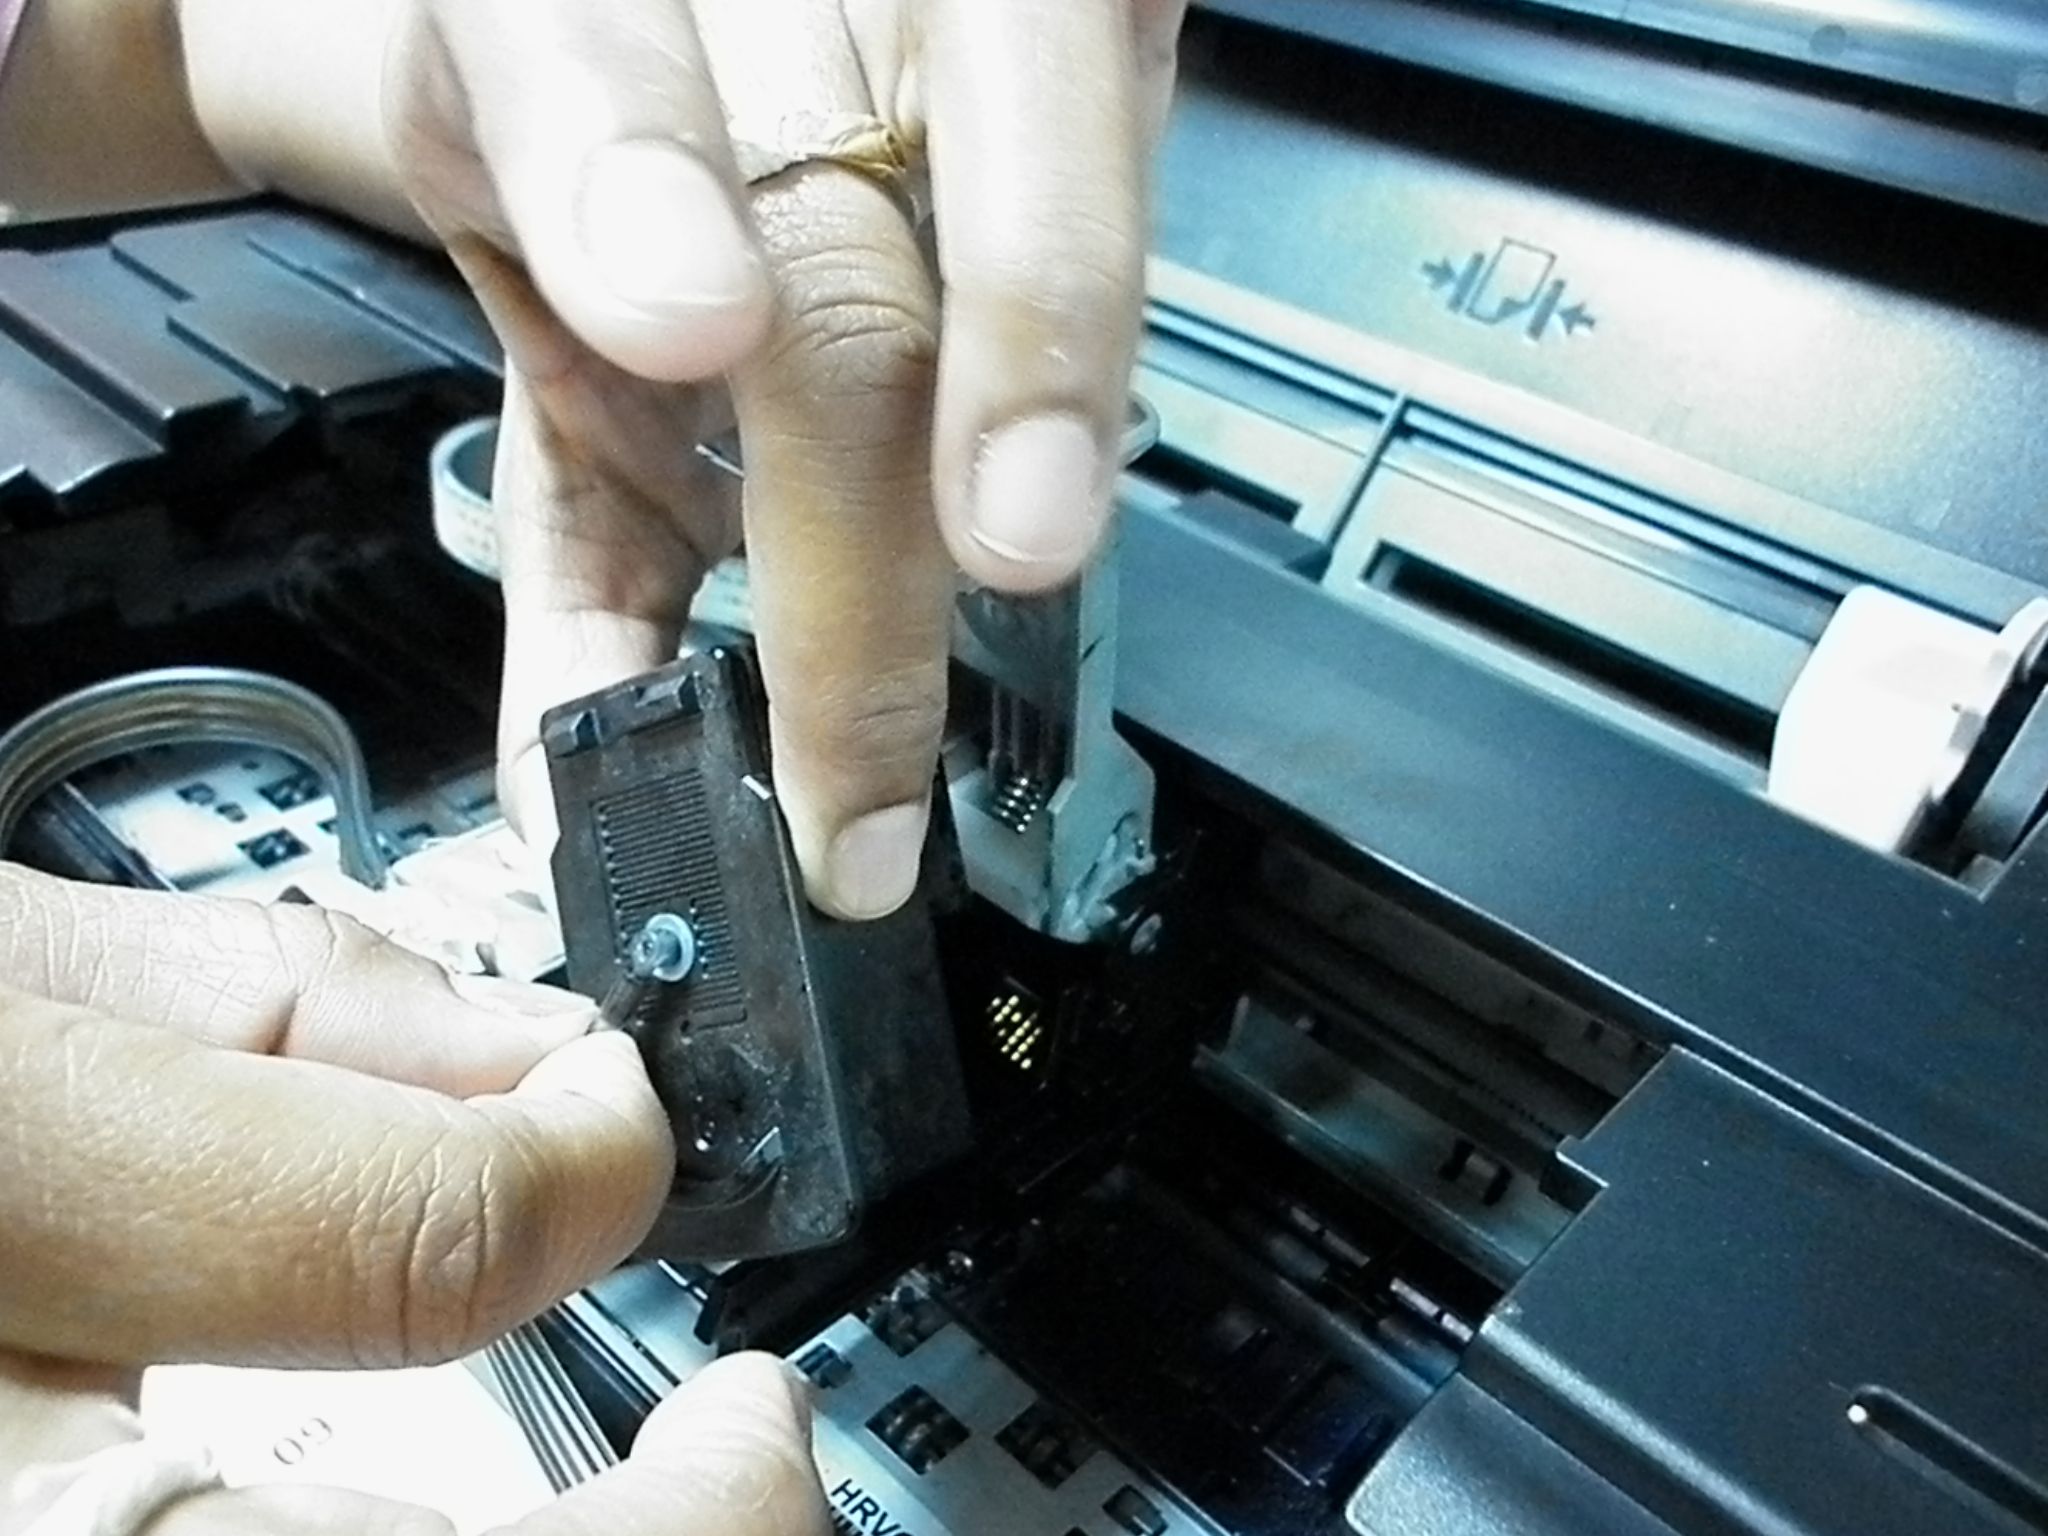 How To Unclog Printer Ink